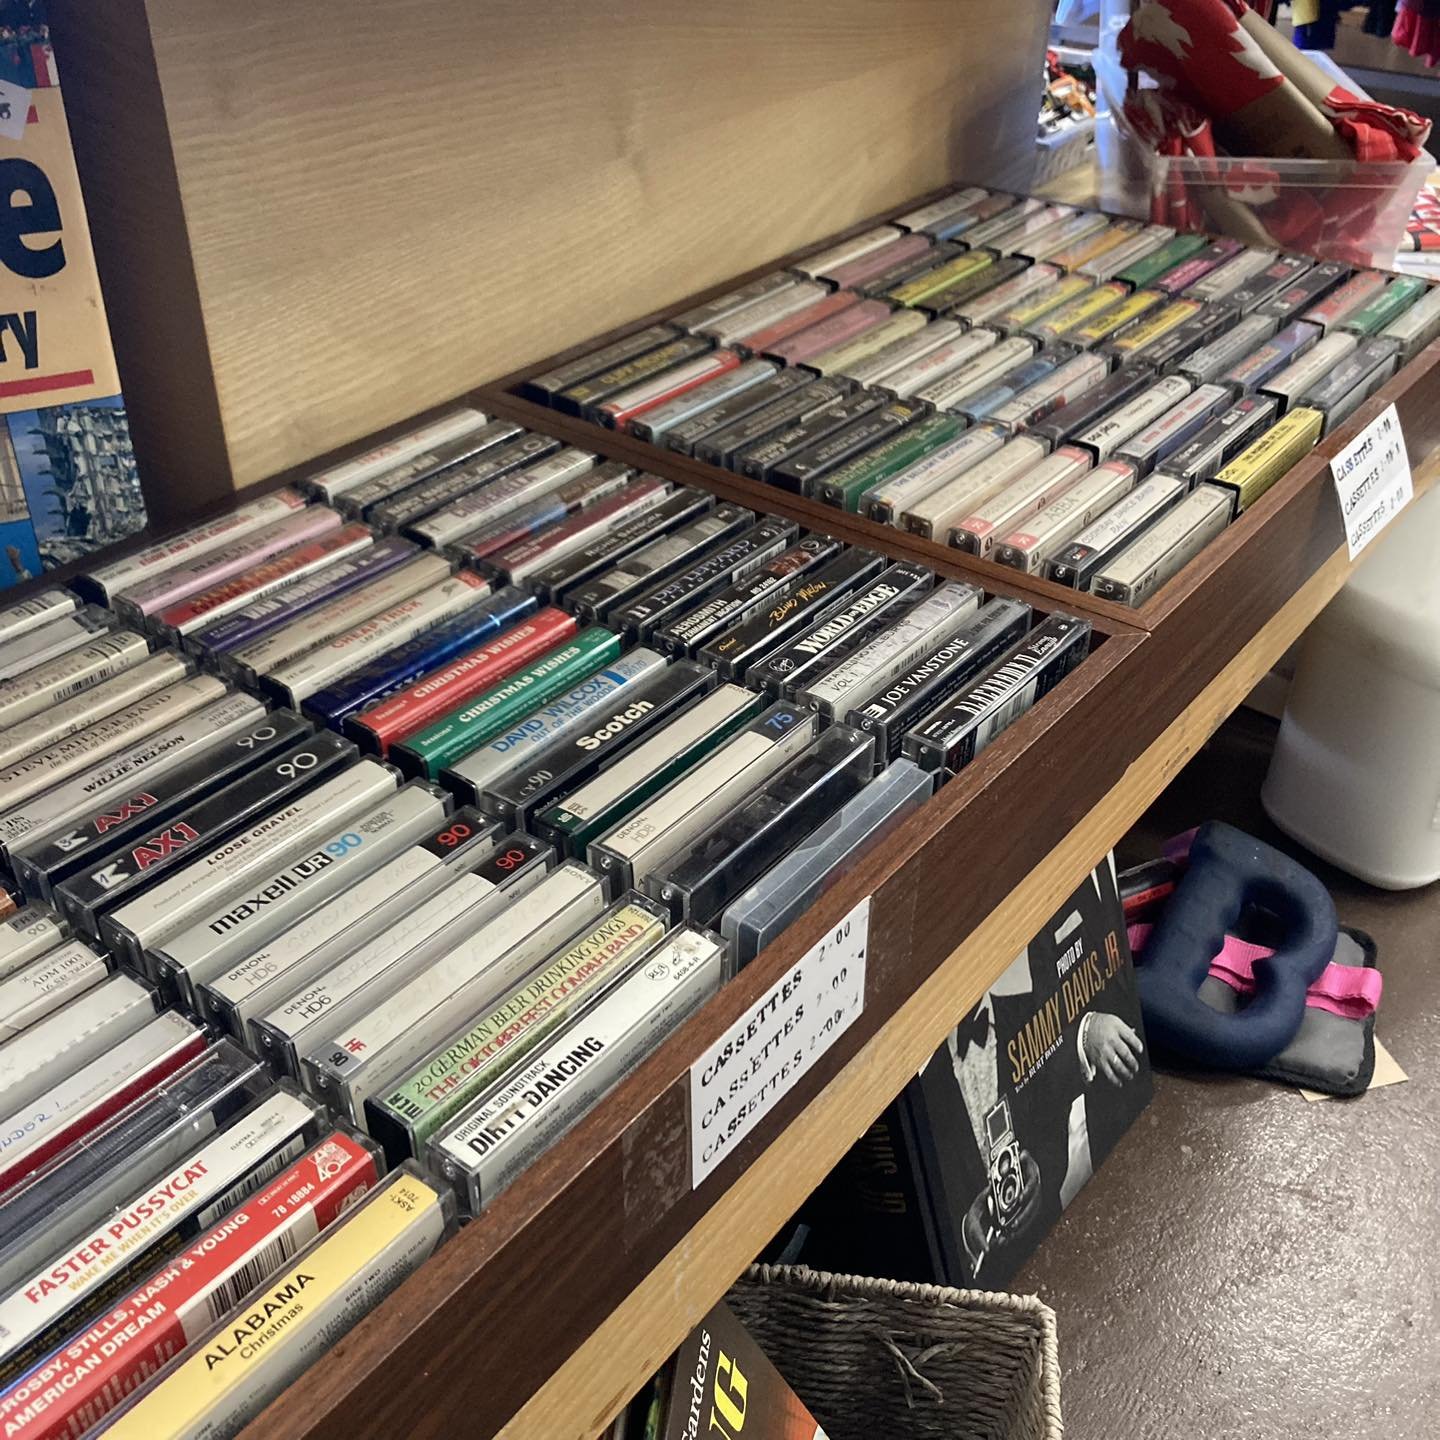 Added a large collection of cassettes to the shop last week. 

Not just common fodder either. 

Aerosmith, Bon Jovi, Willie Nelson, Steve Miller Band and more&hellip;

$2 each

🌲

#secondhand #thrift #thriftshopfinds #thriftshop #thriftstore #shoplo